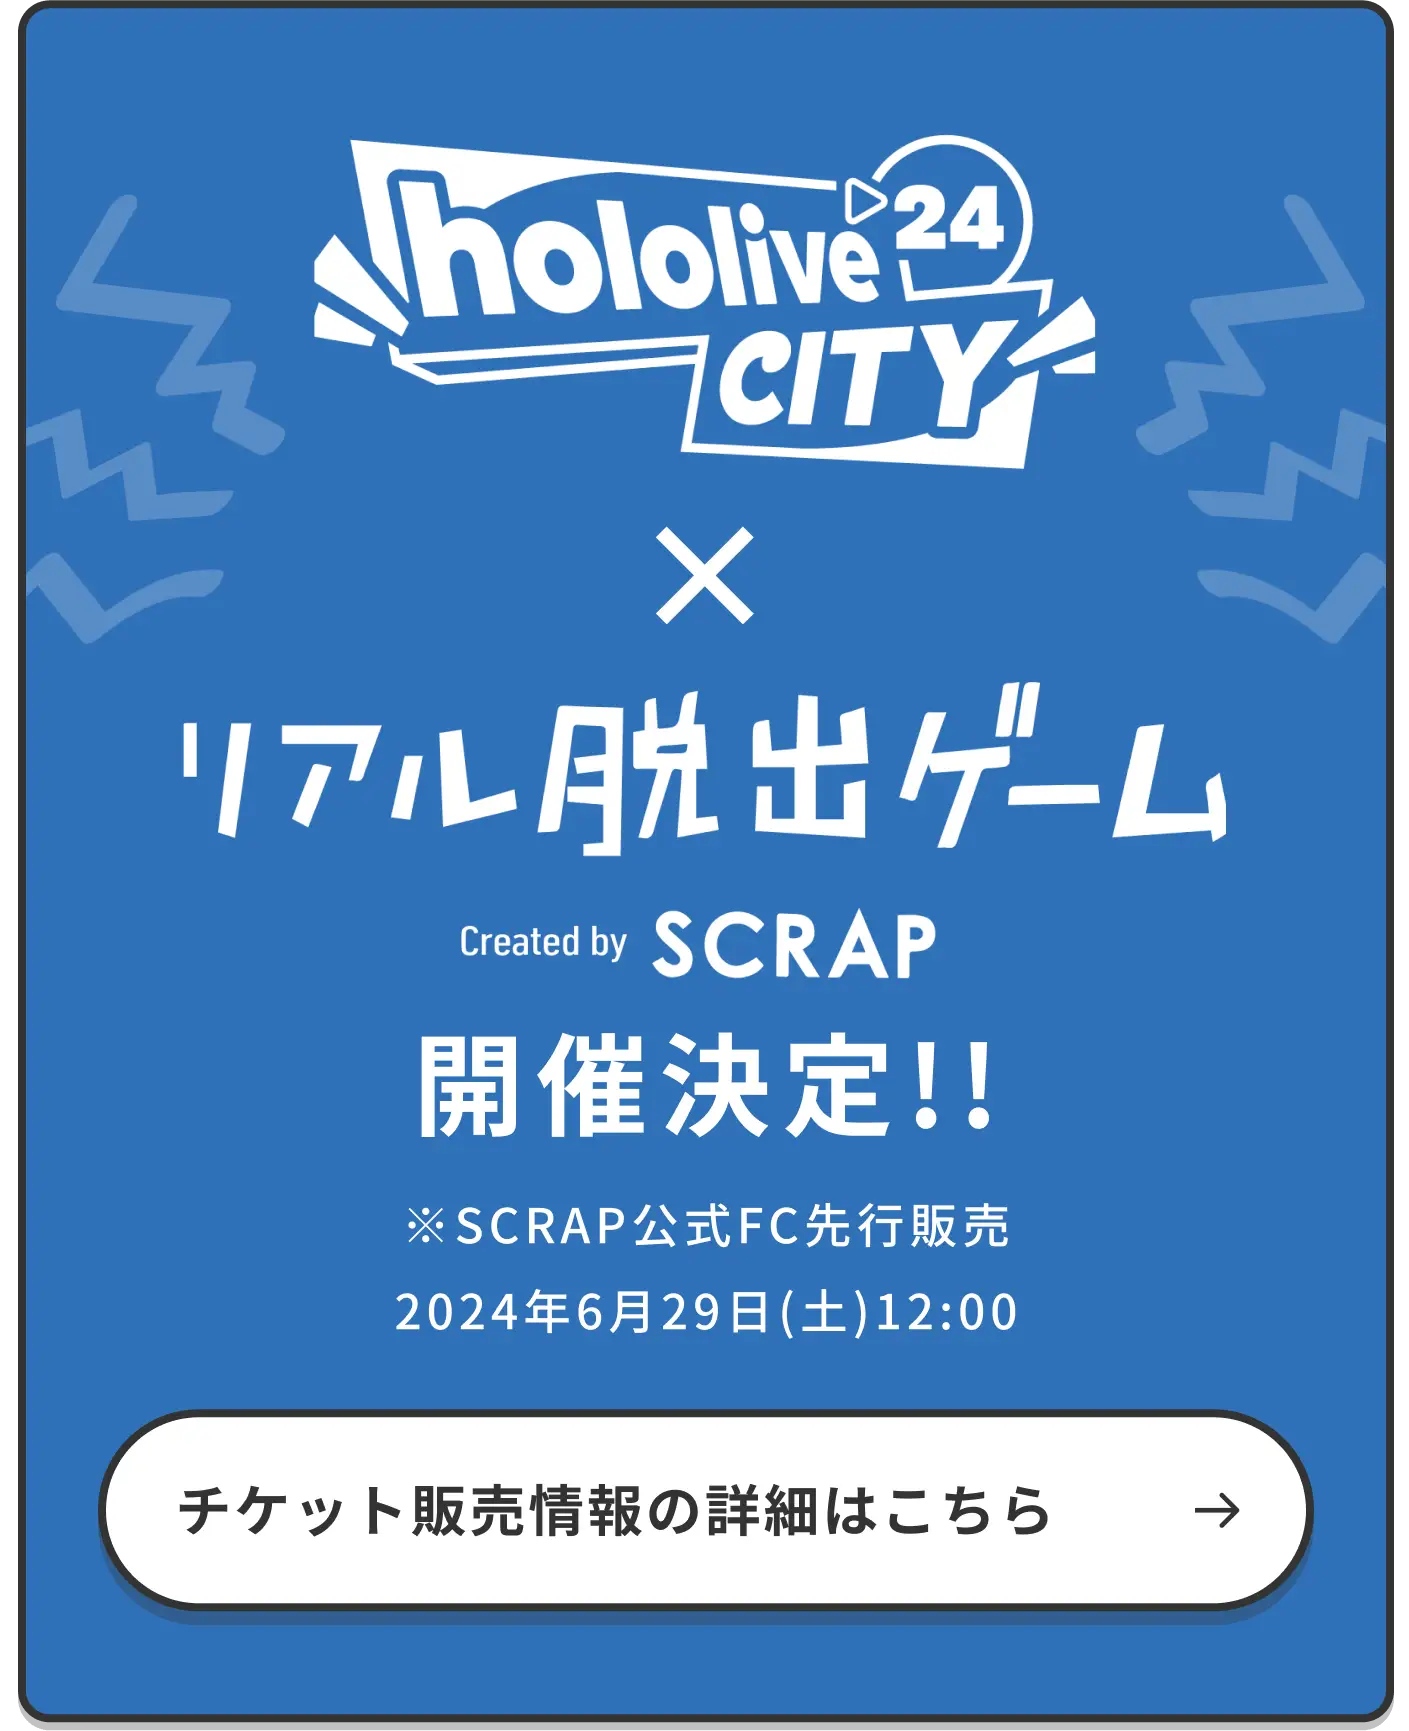 hololiveCITY24 x リアル脱出ゲーム Created by SCRAP